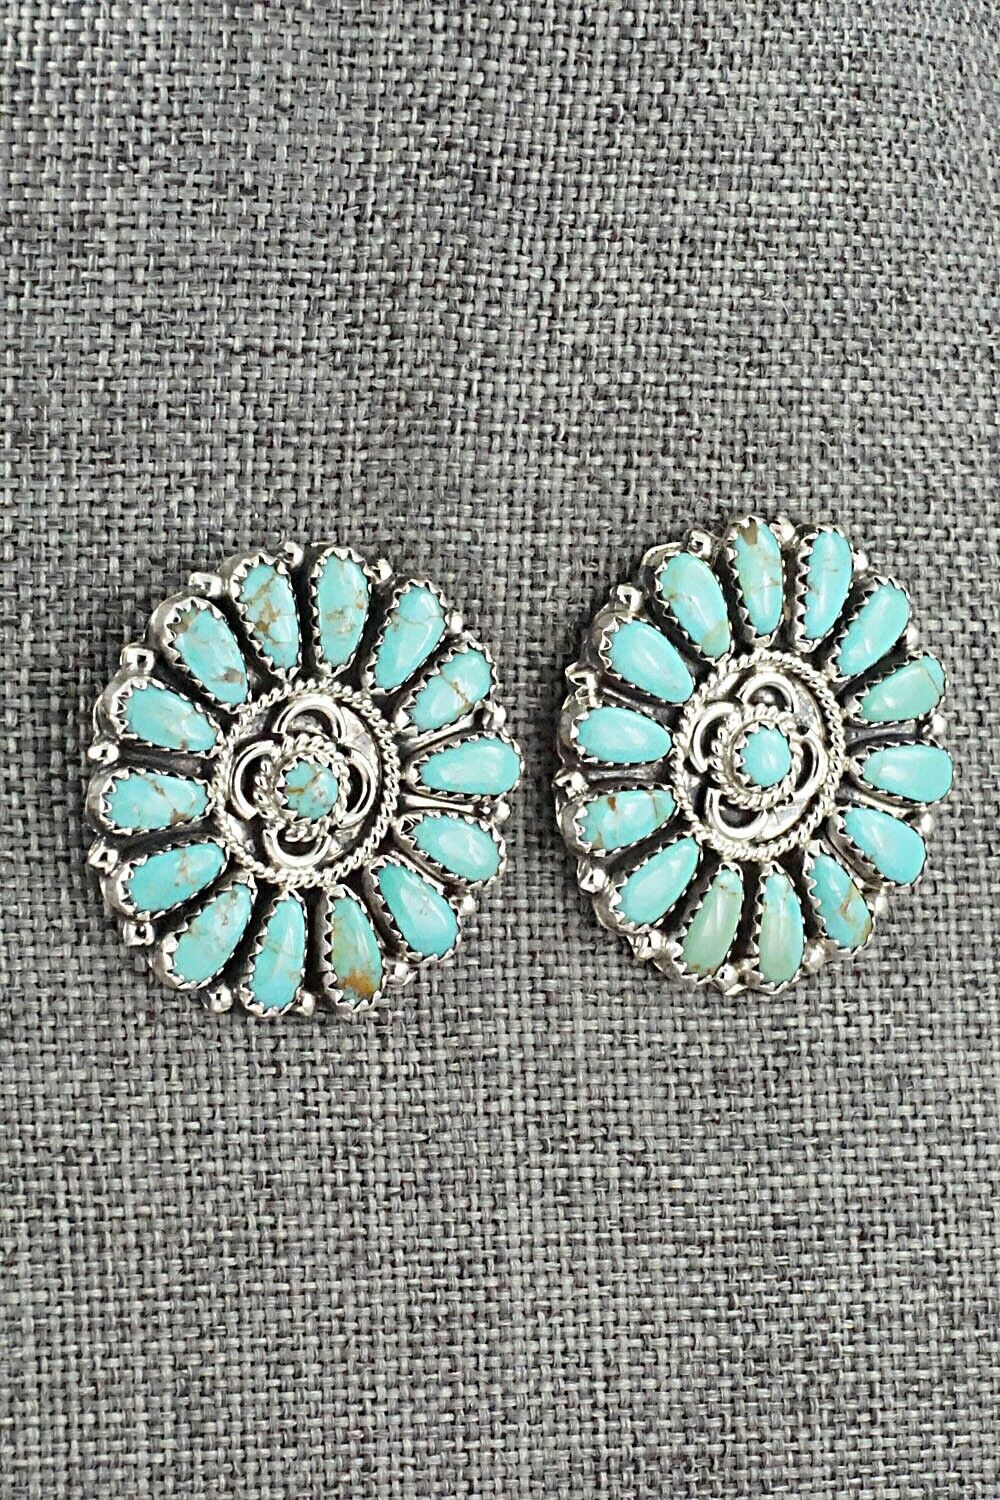 Turquoise and Sterling Silver Earrings - Zeita Begay